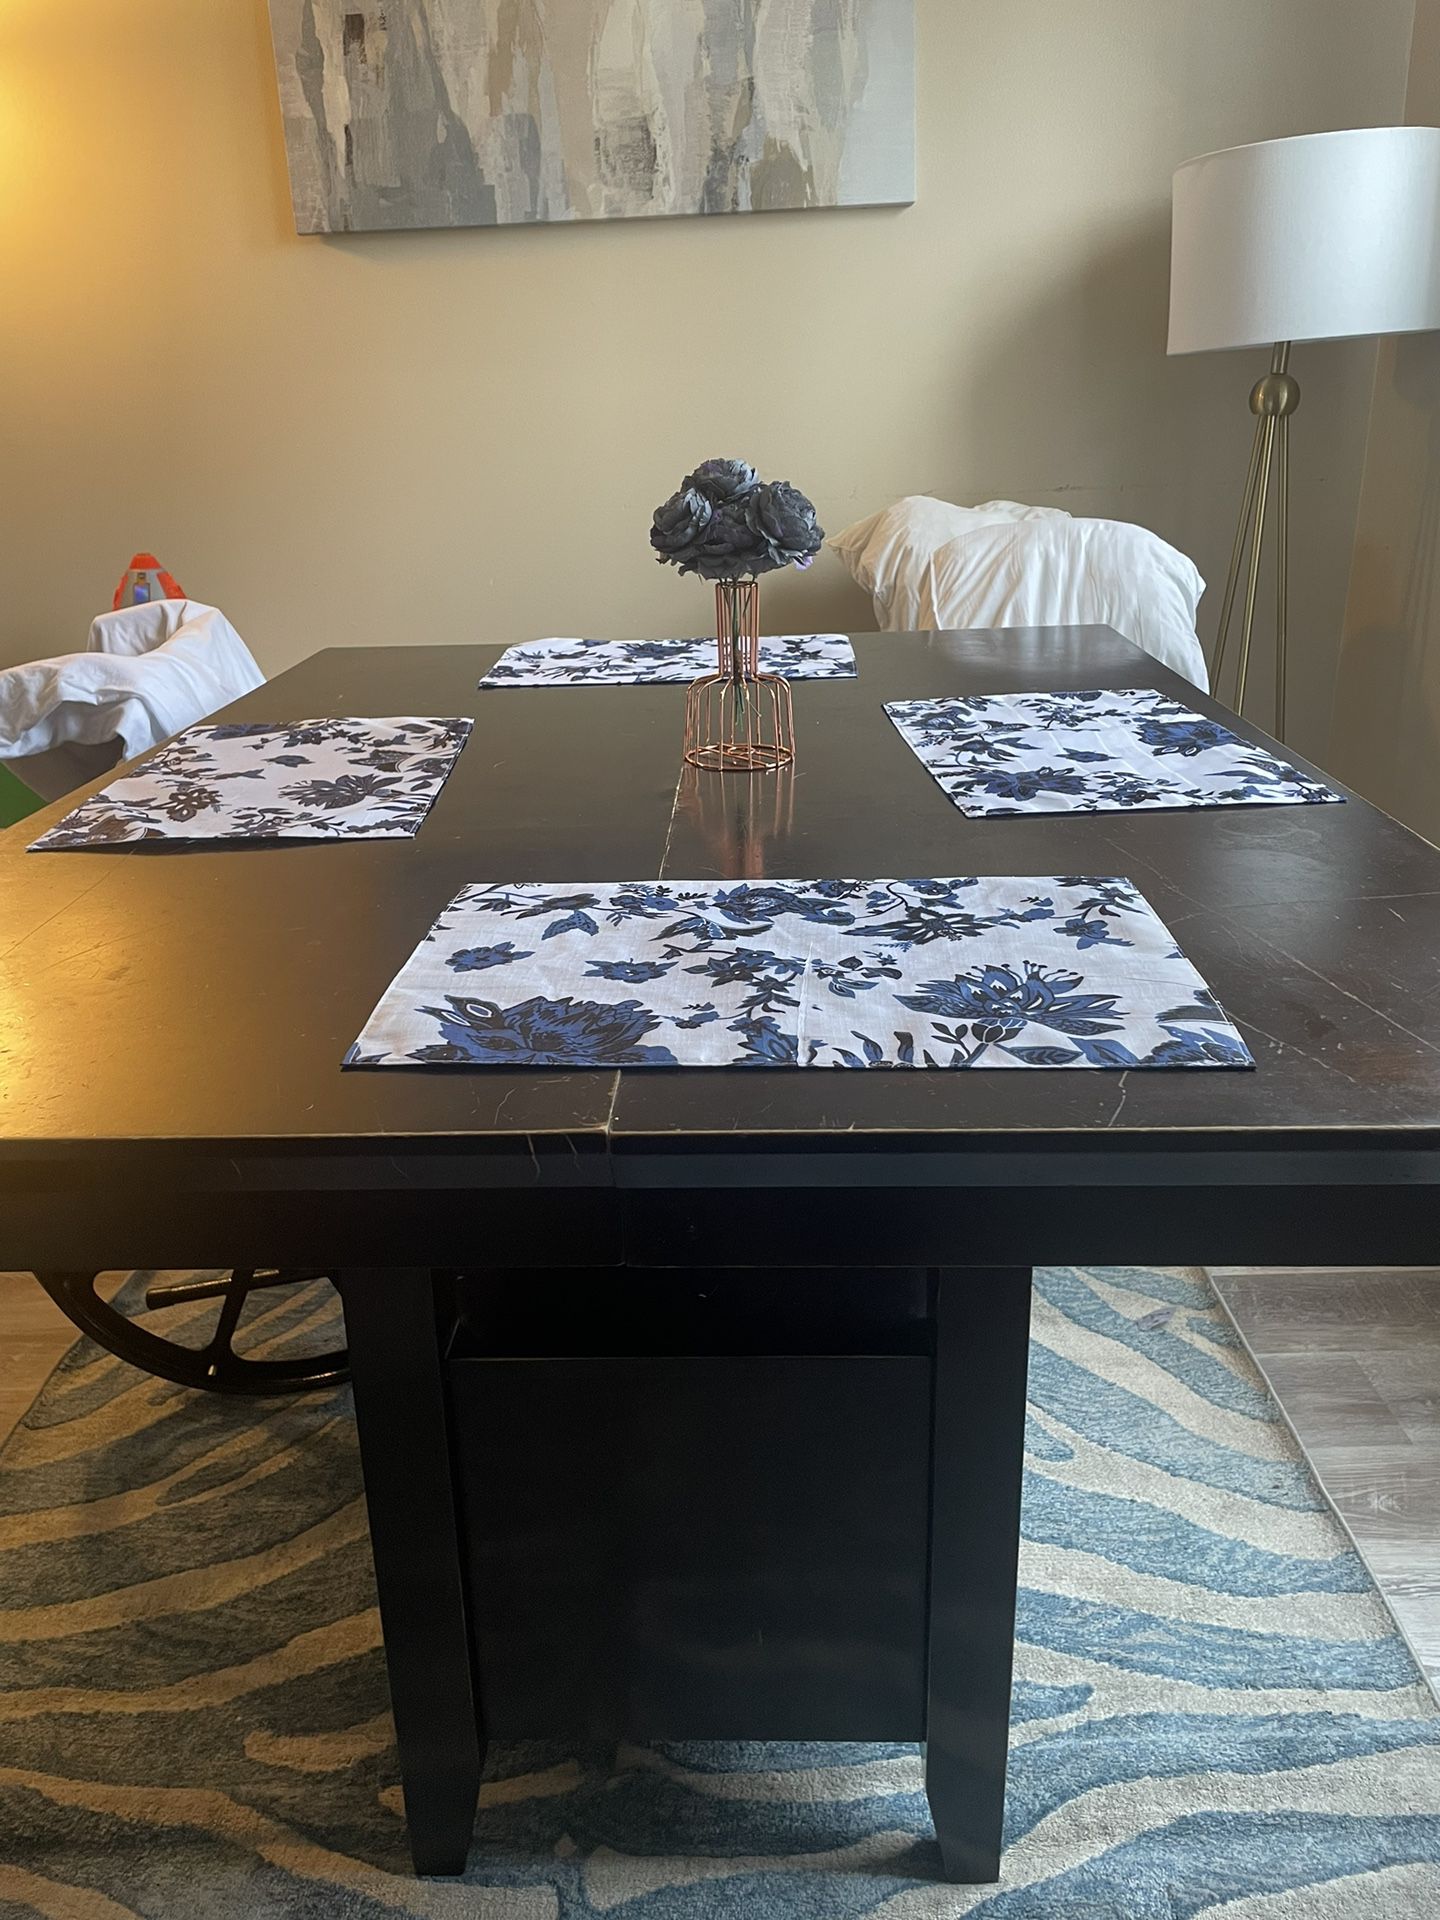 Gorgeous Well Made Wood Dining Room Table